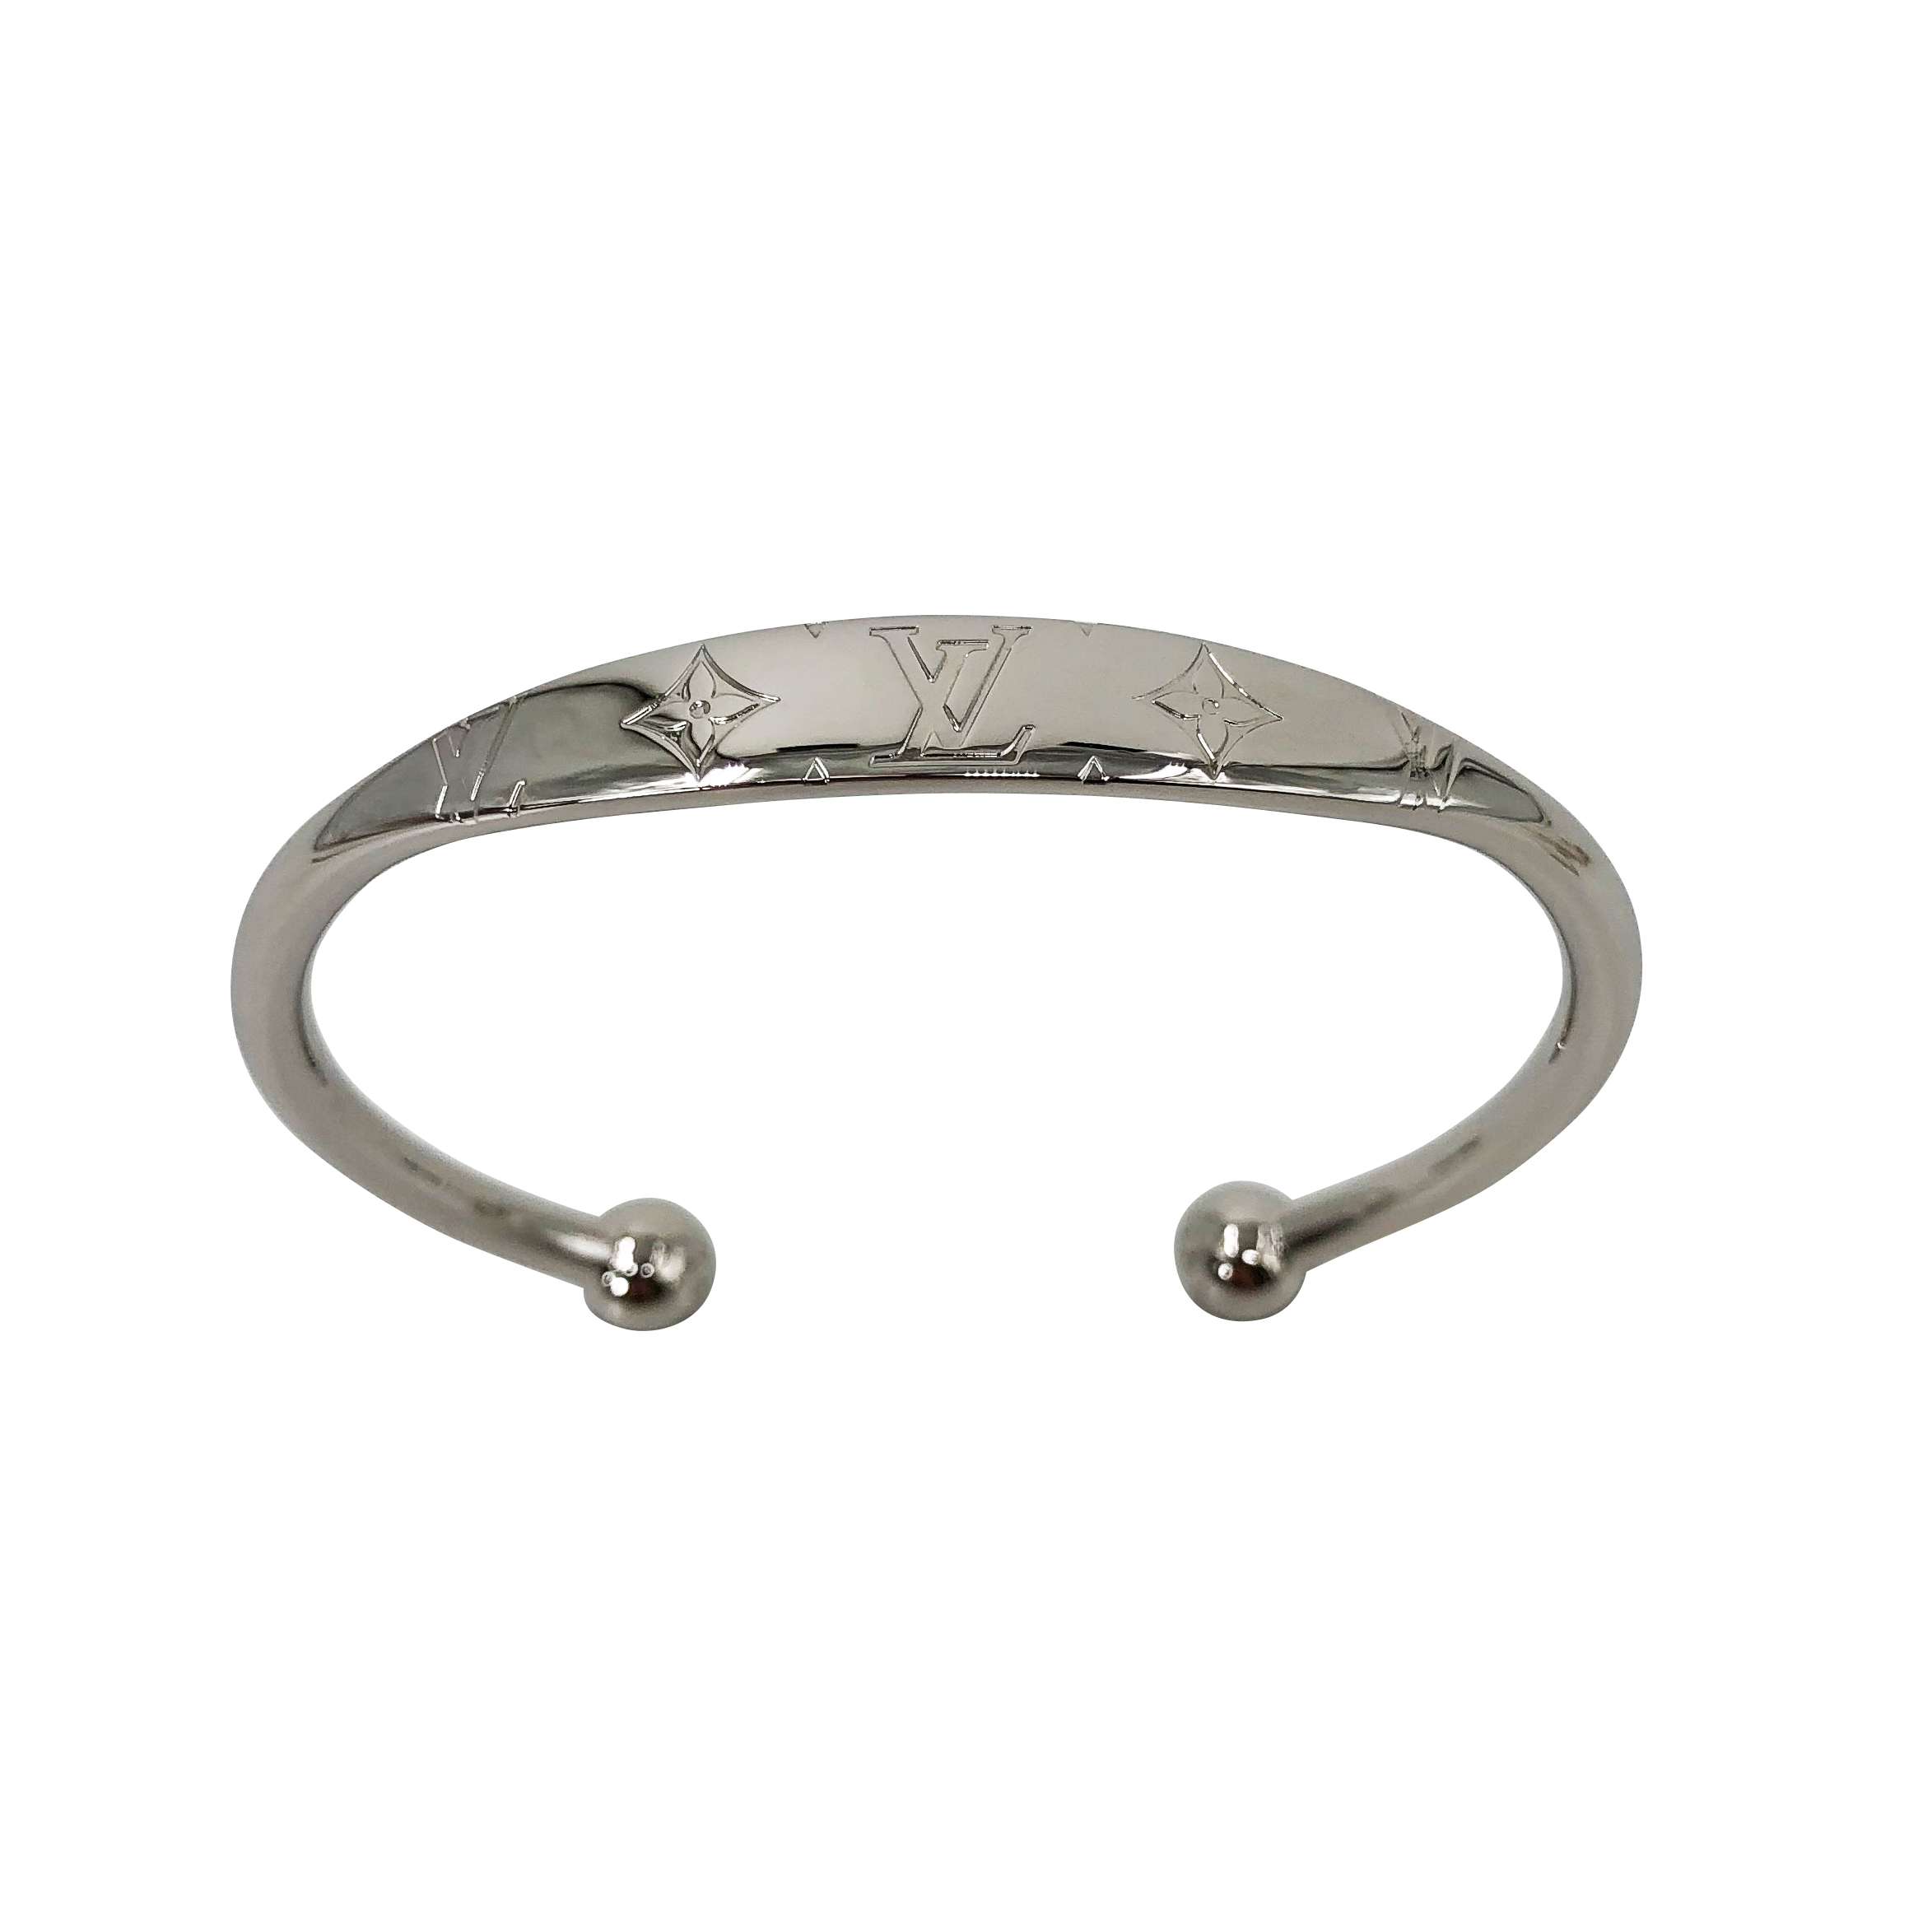 Louis Vuitton bracelet in palladium finished with engraved